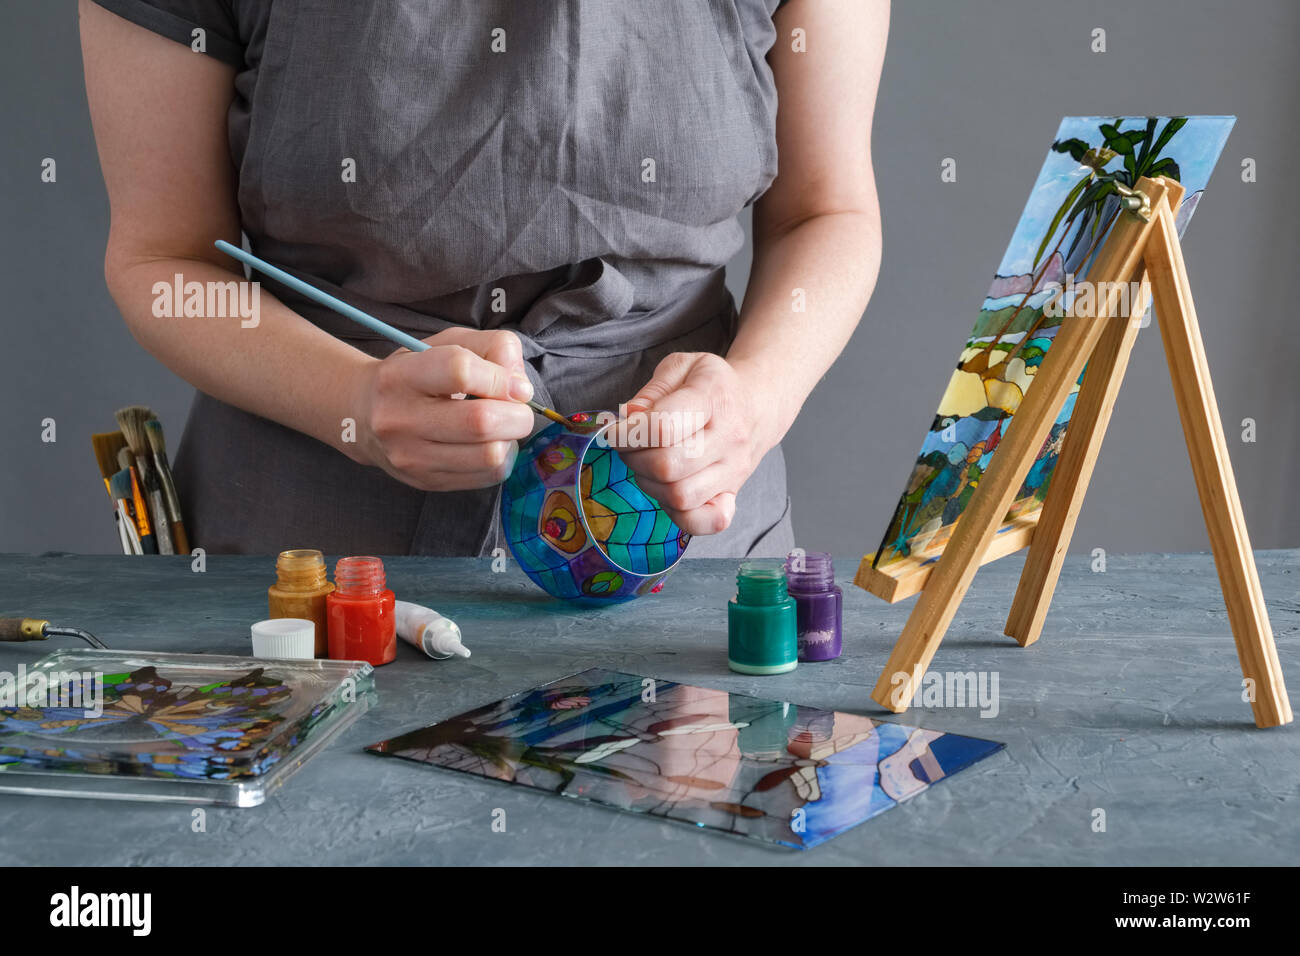 Painter holding a paintbrush in his hand and painting with stained glass paints on a glass vase. Stock Photo